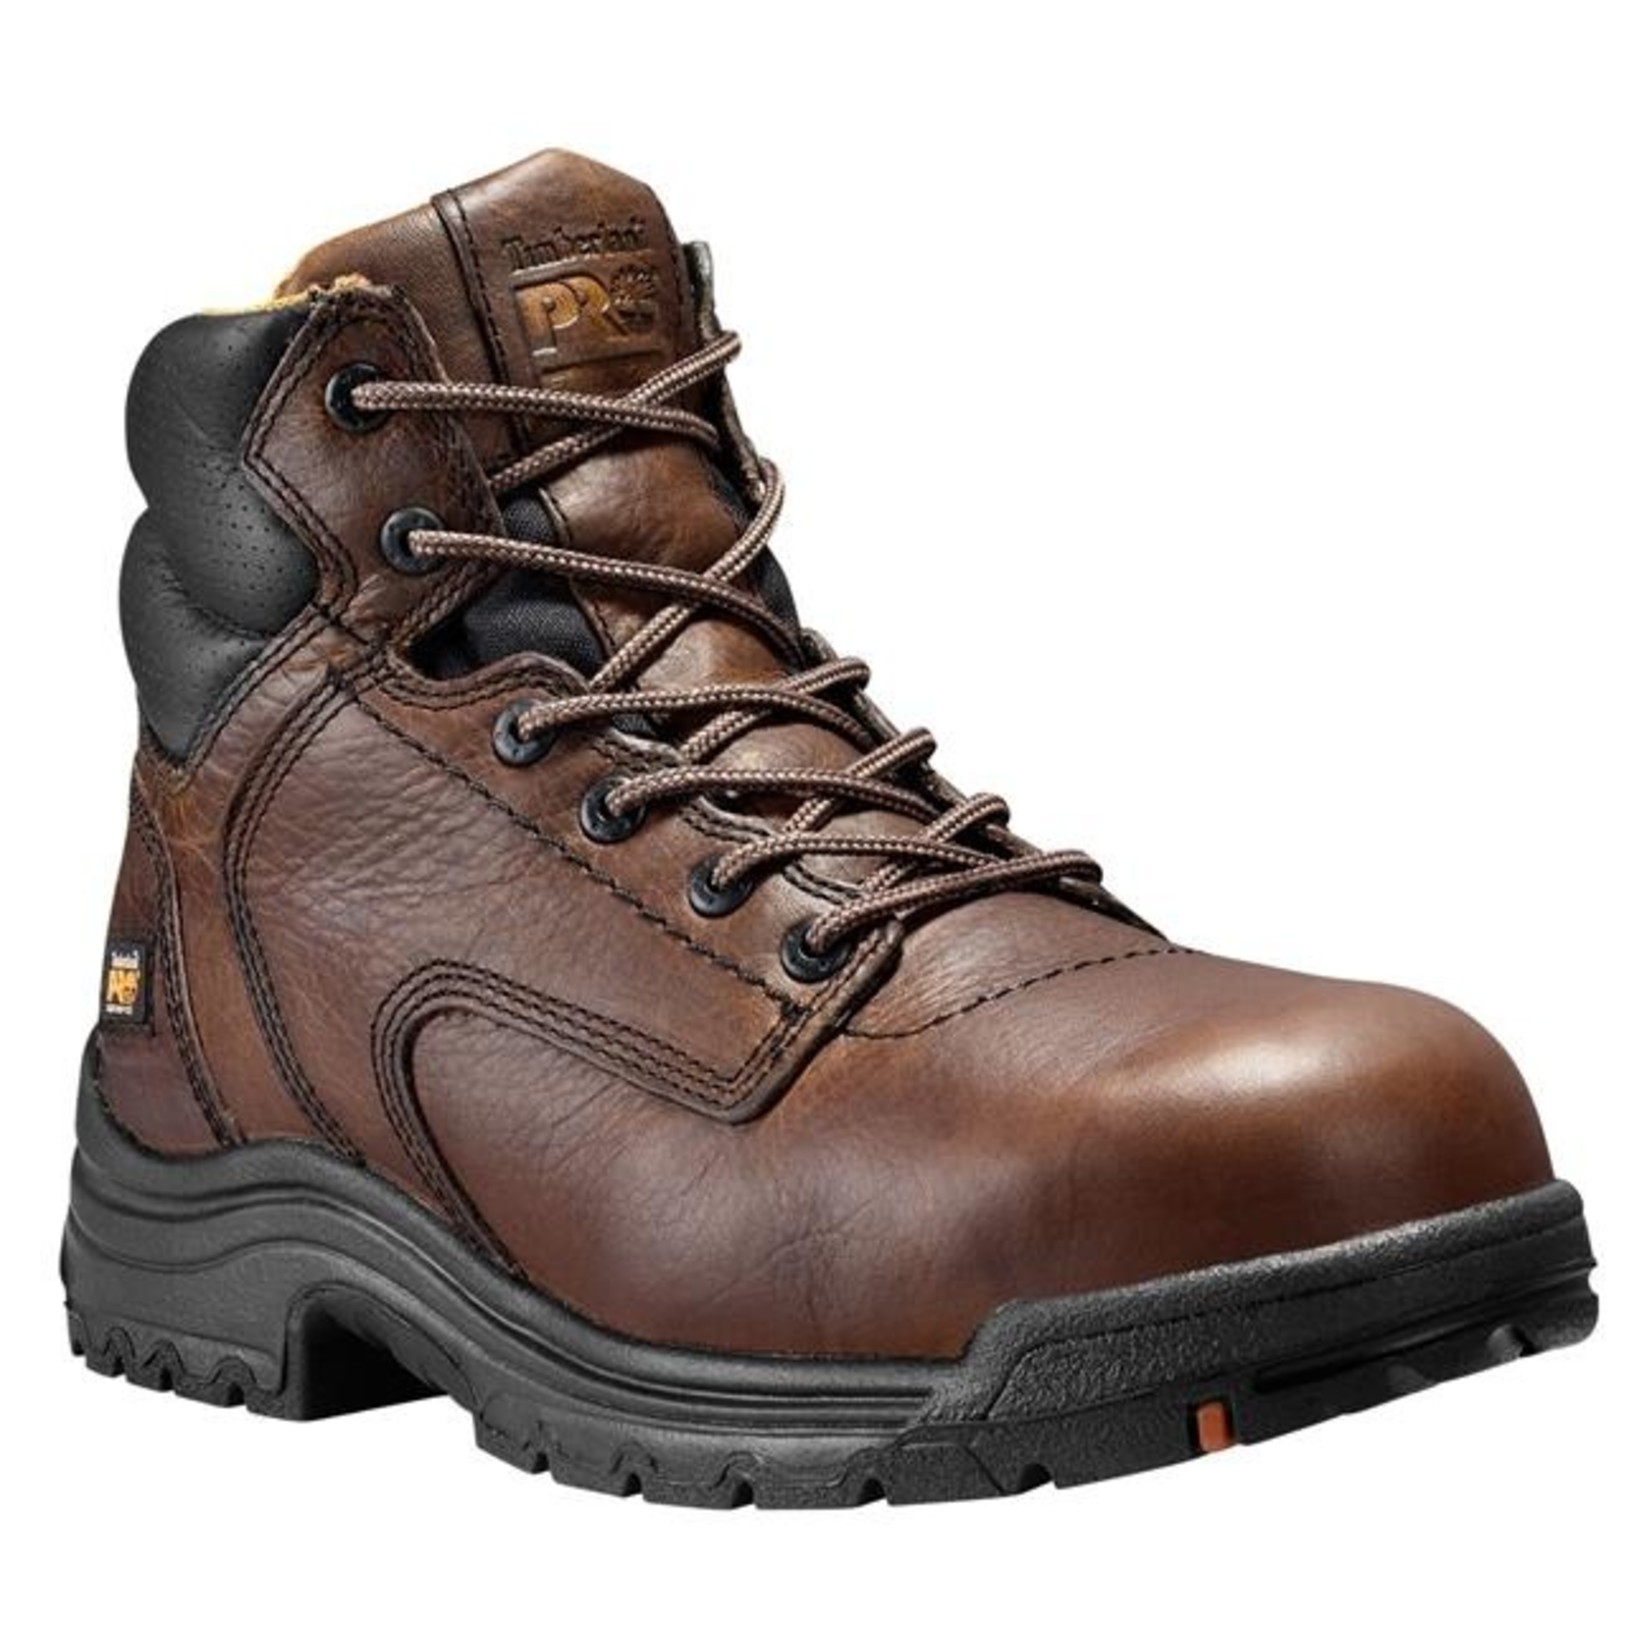 Timberland Pro Titan 6” Men’s Composite Toe Safety Boots - Shippy Shoes